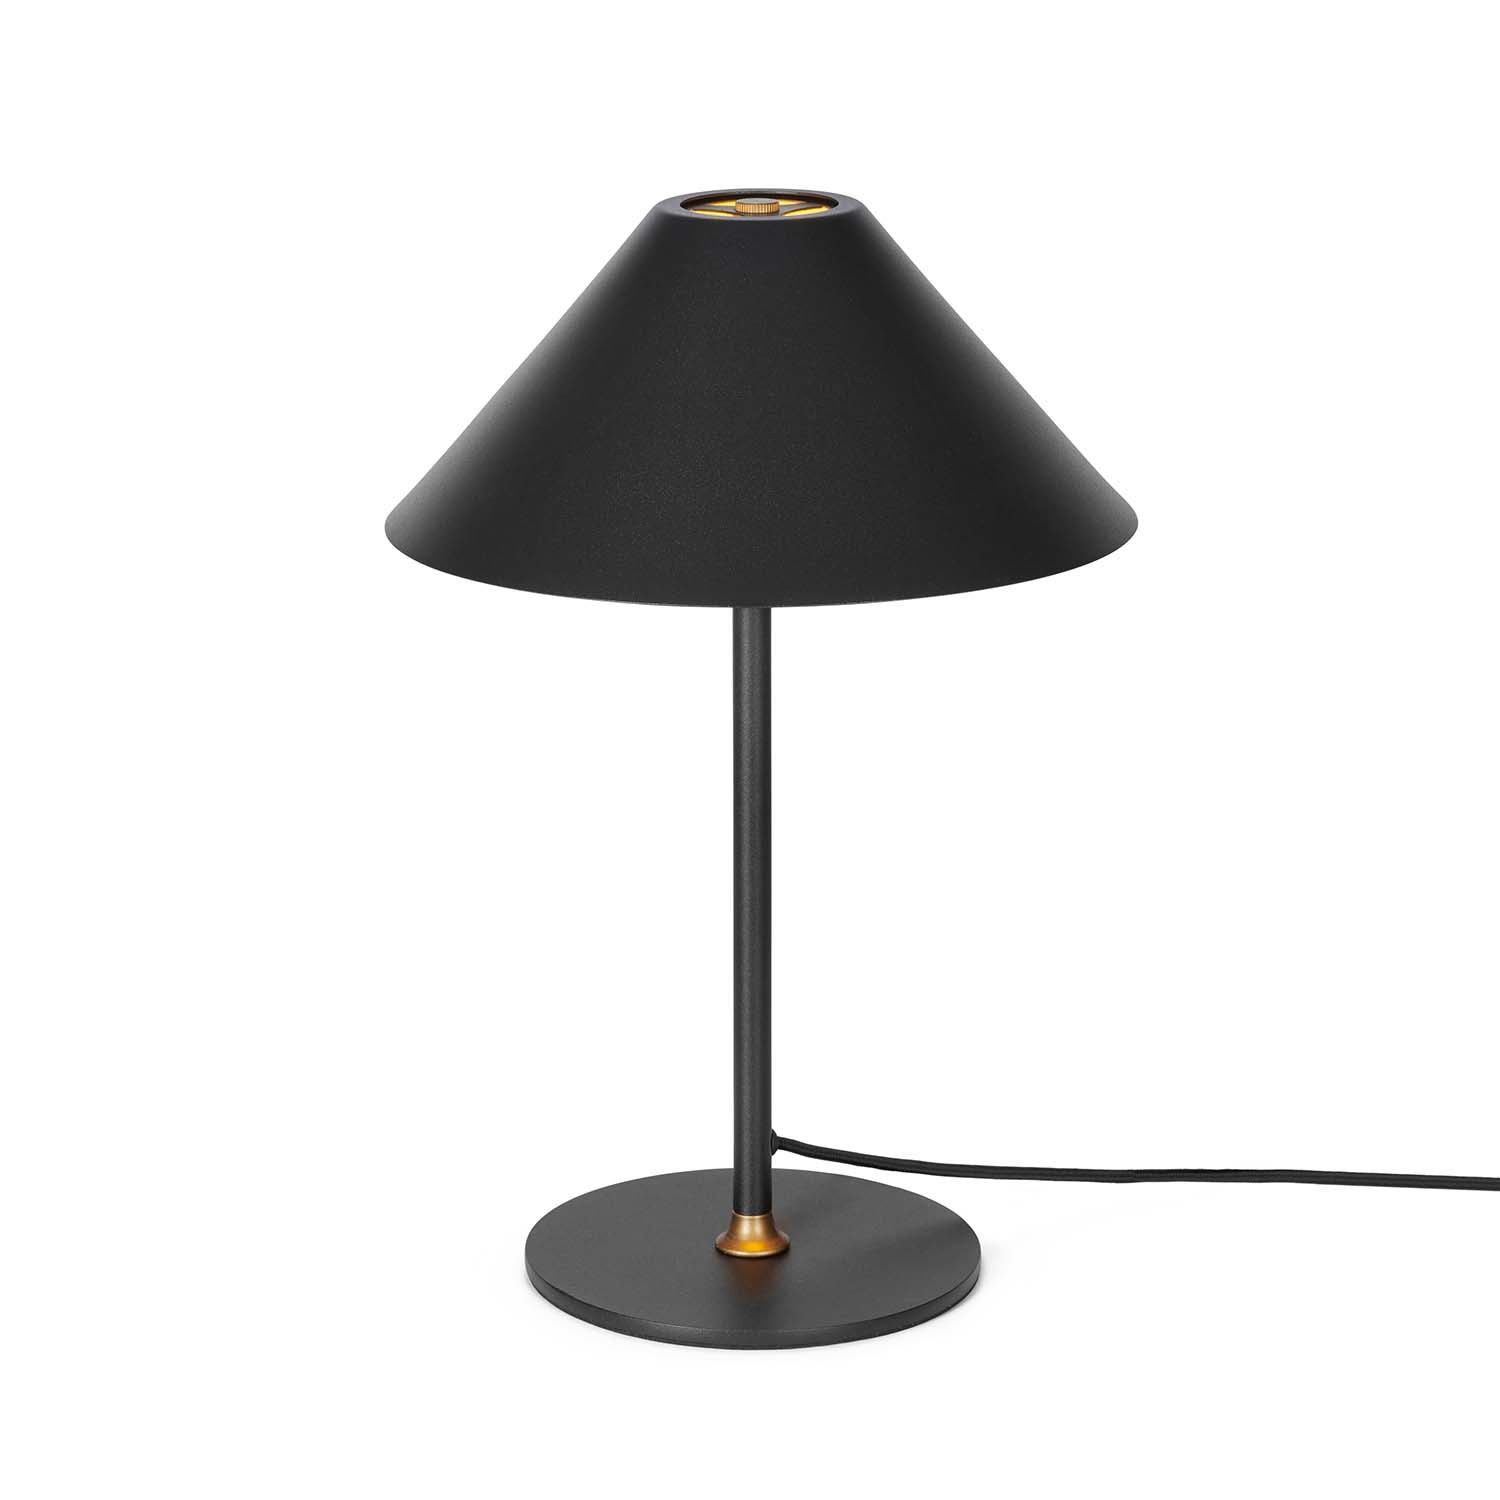 HYGGE - Vintage design conical table lamp